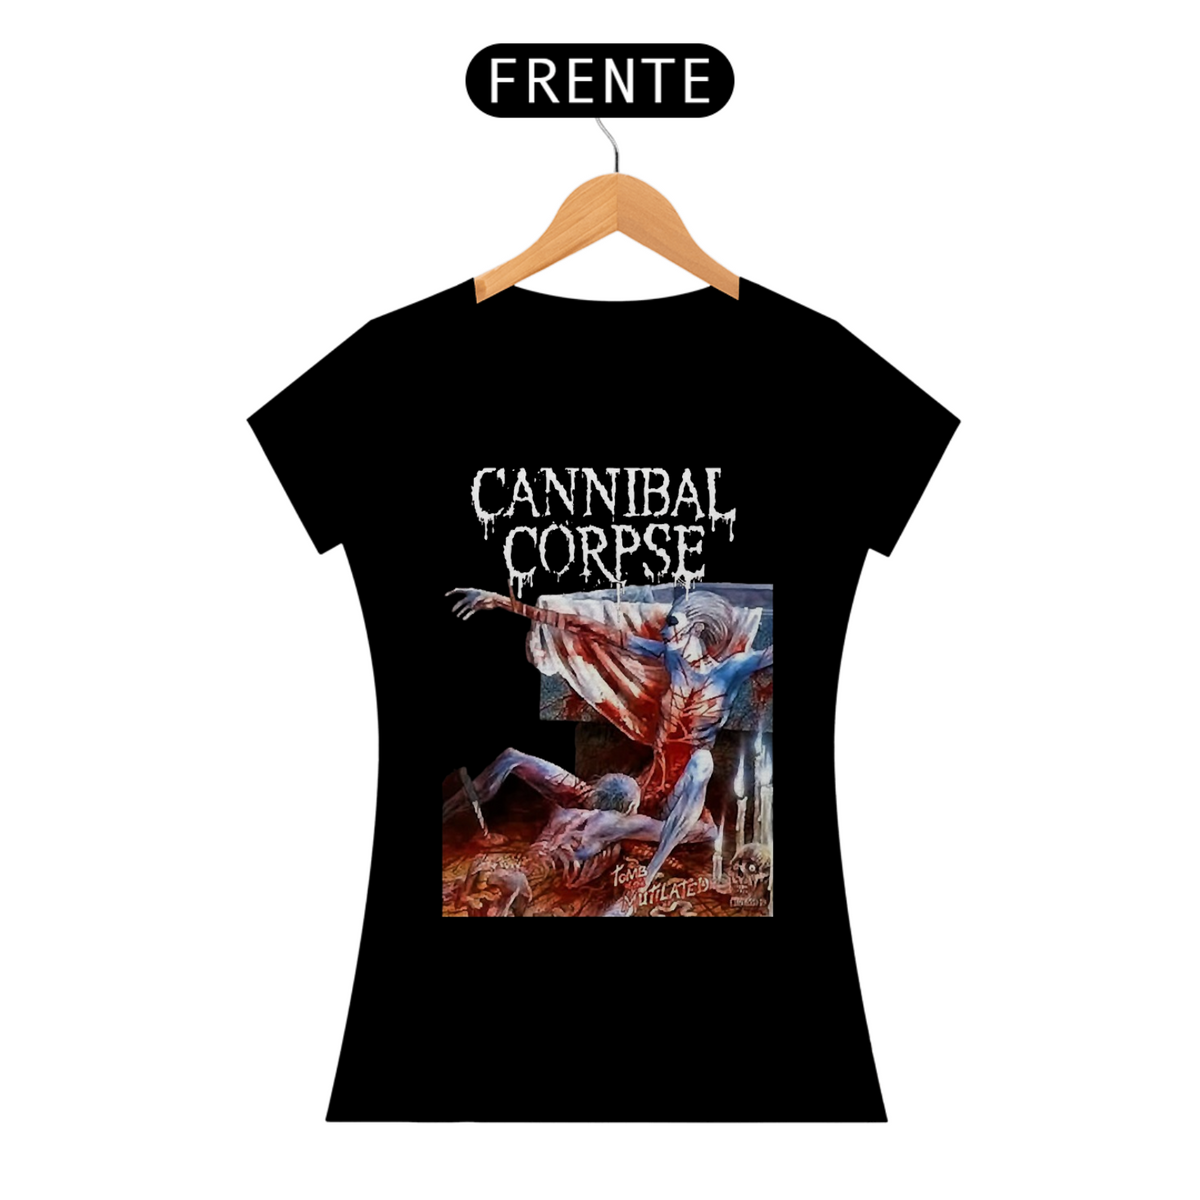 Nome do produto: Cannibal Corpse - Tomb of the Mutilated